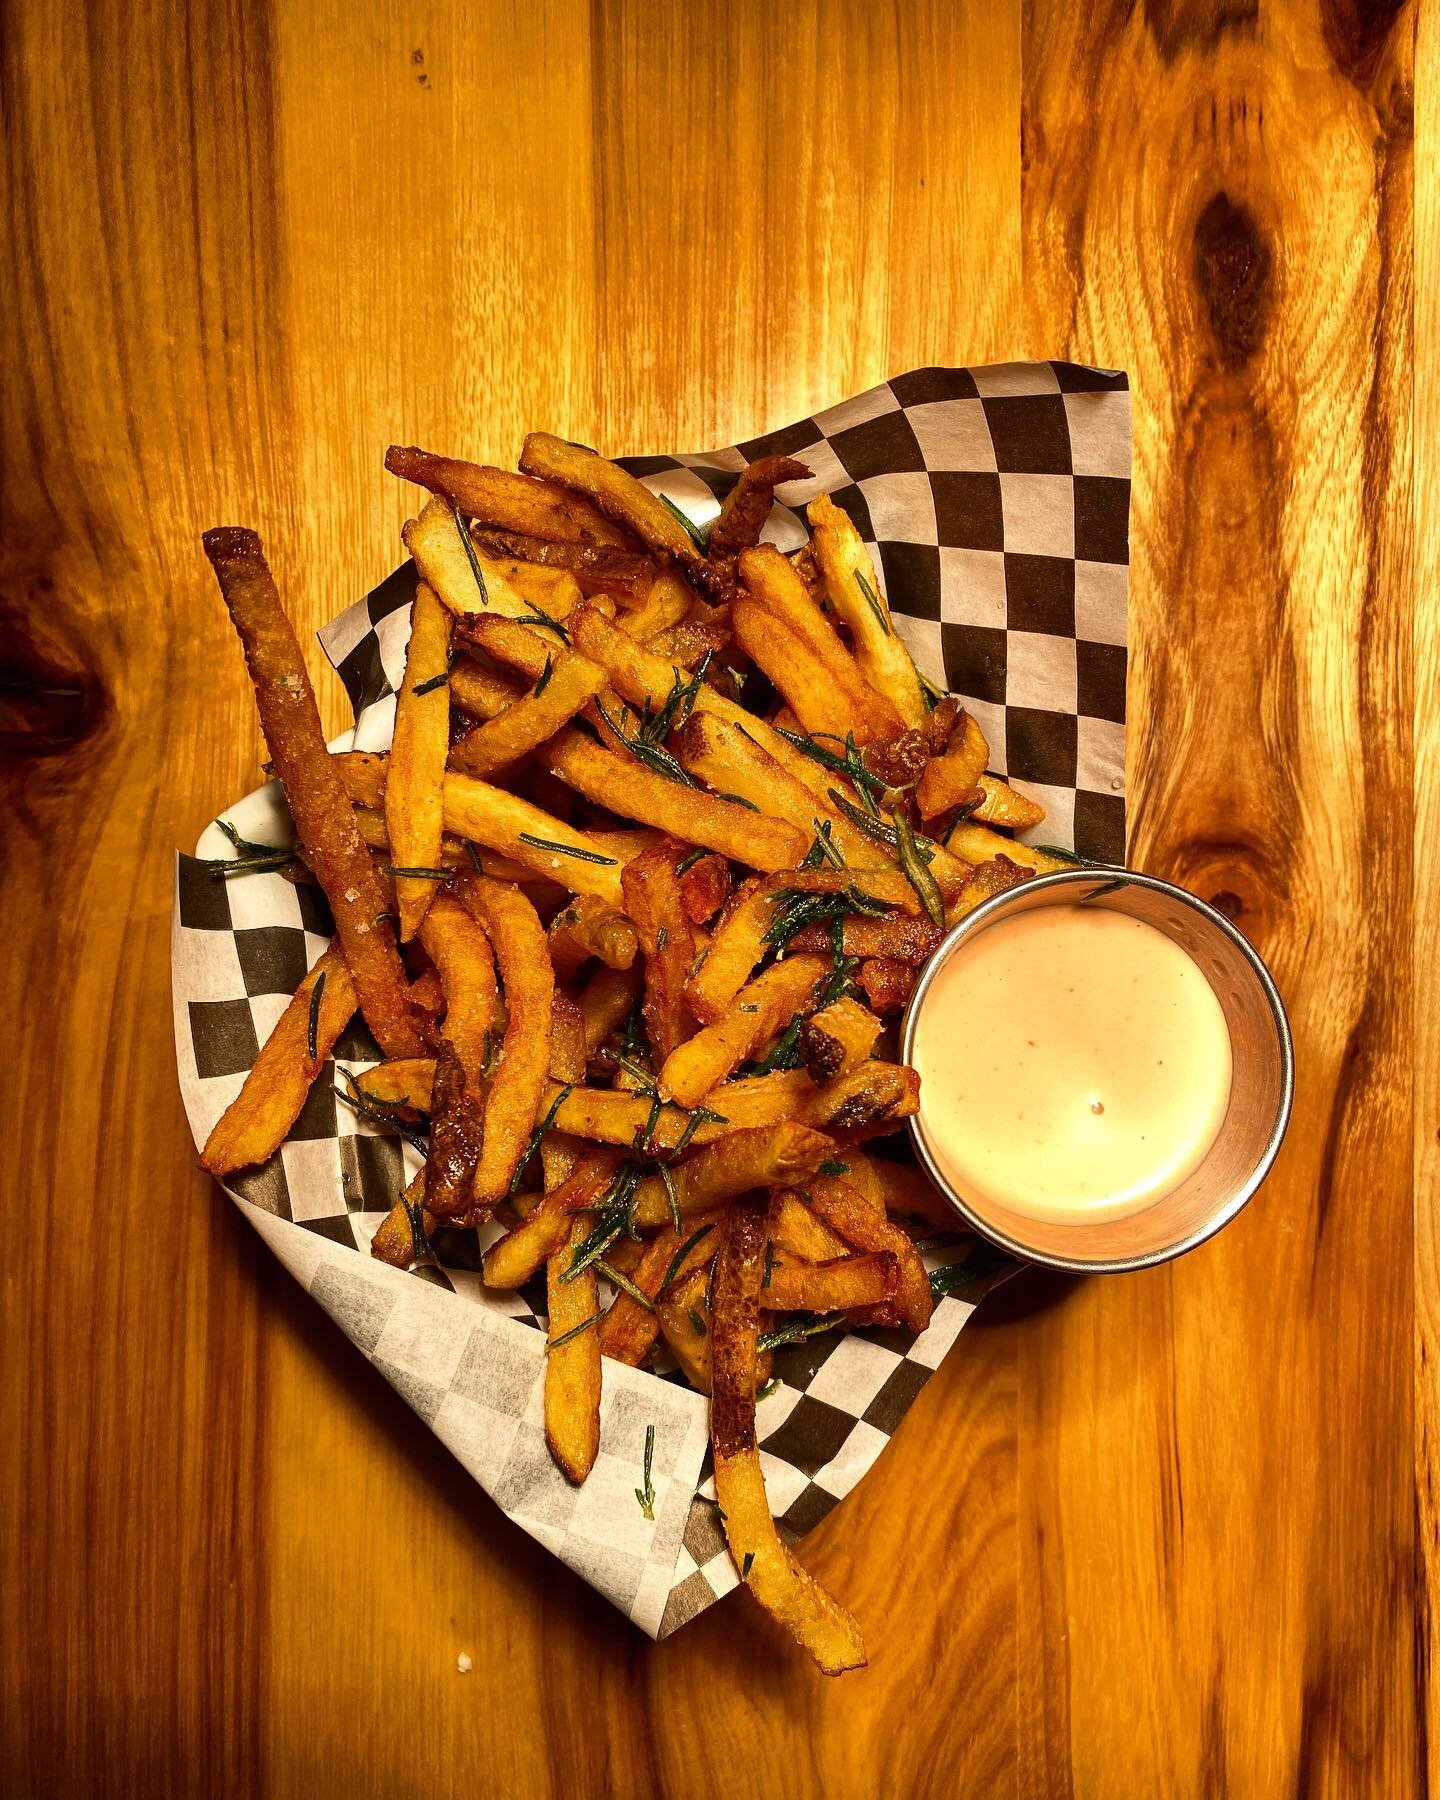 Rosemary Duck Fat Fries.... that&rsquo;s it! That&rsquo;s the post! Come get some yum yum in ya tum tum!